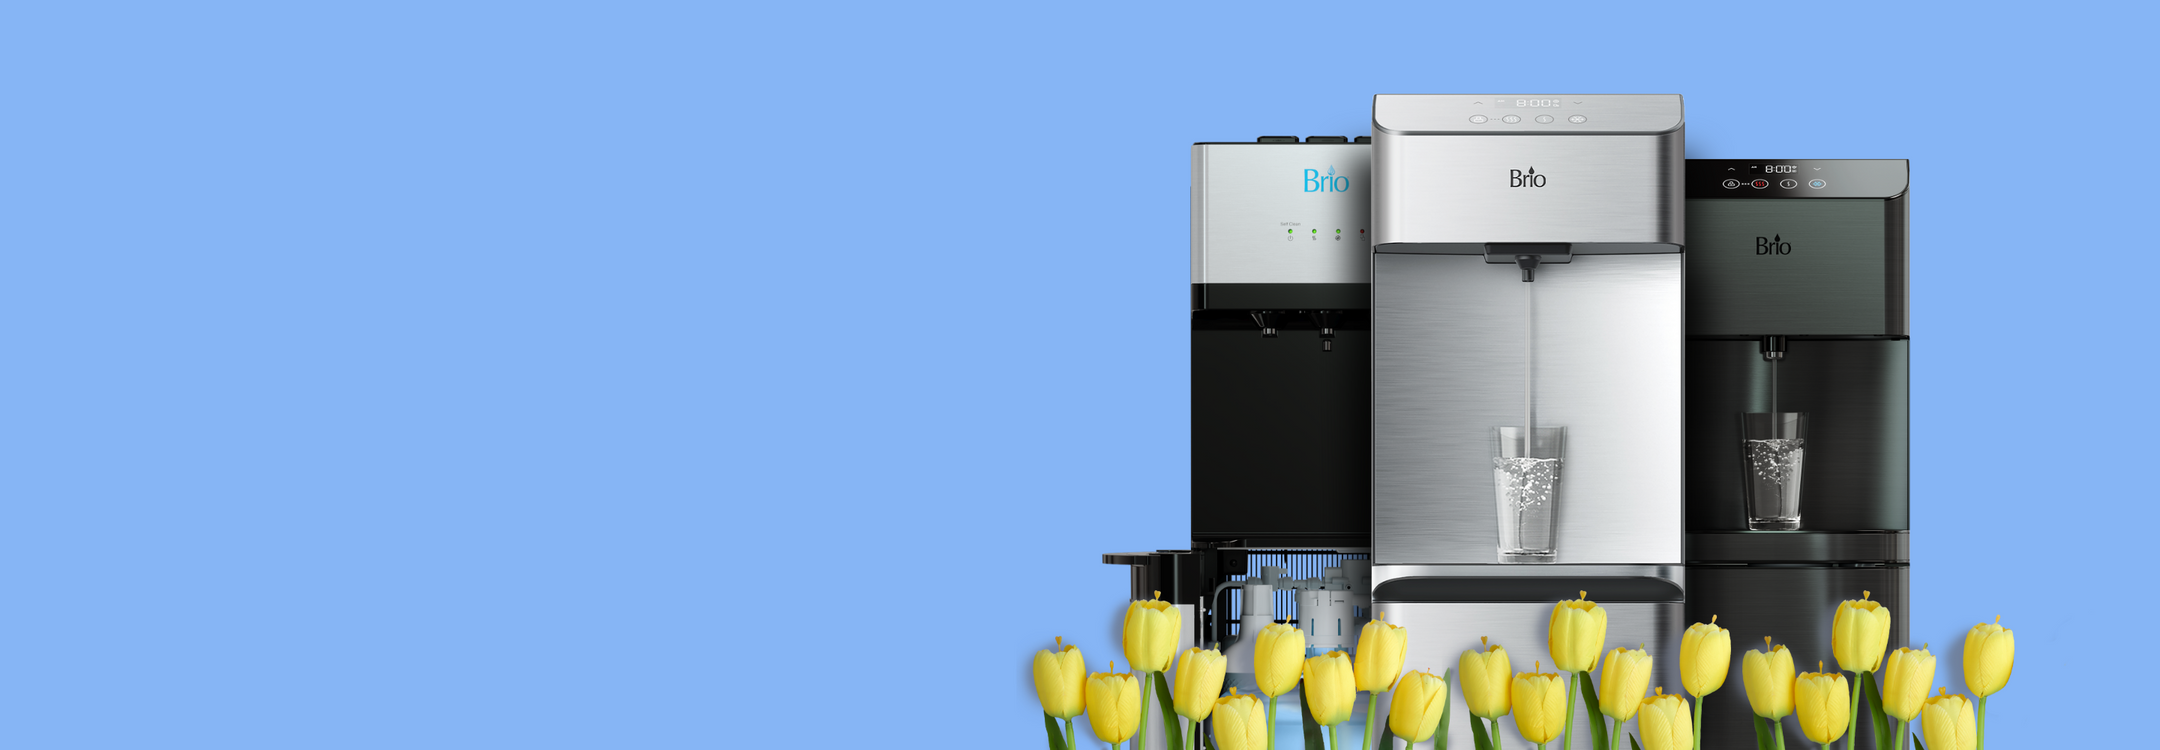 Three Water Coolers Display with Yellow Flowers in Foreground